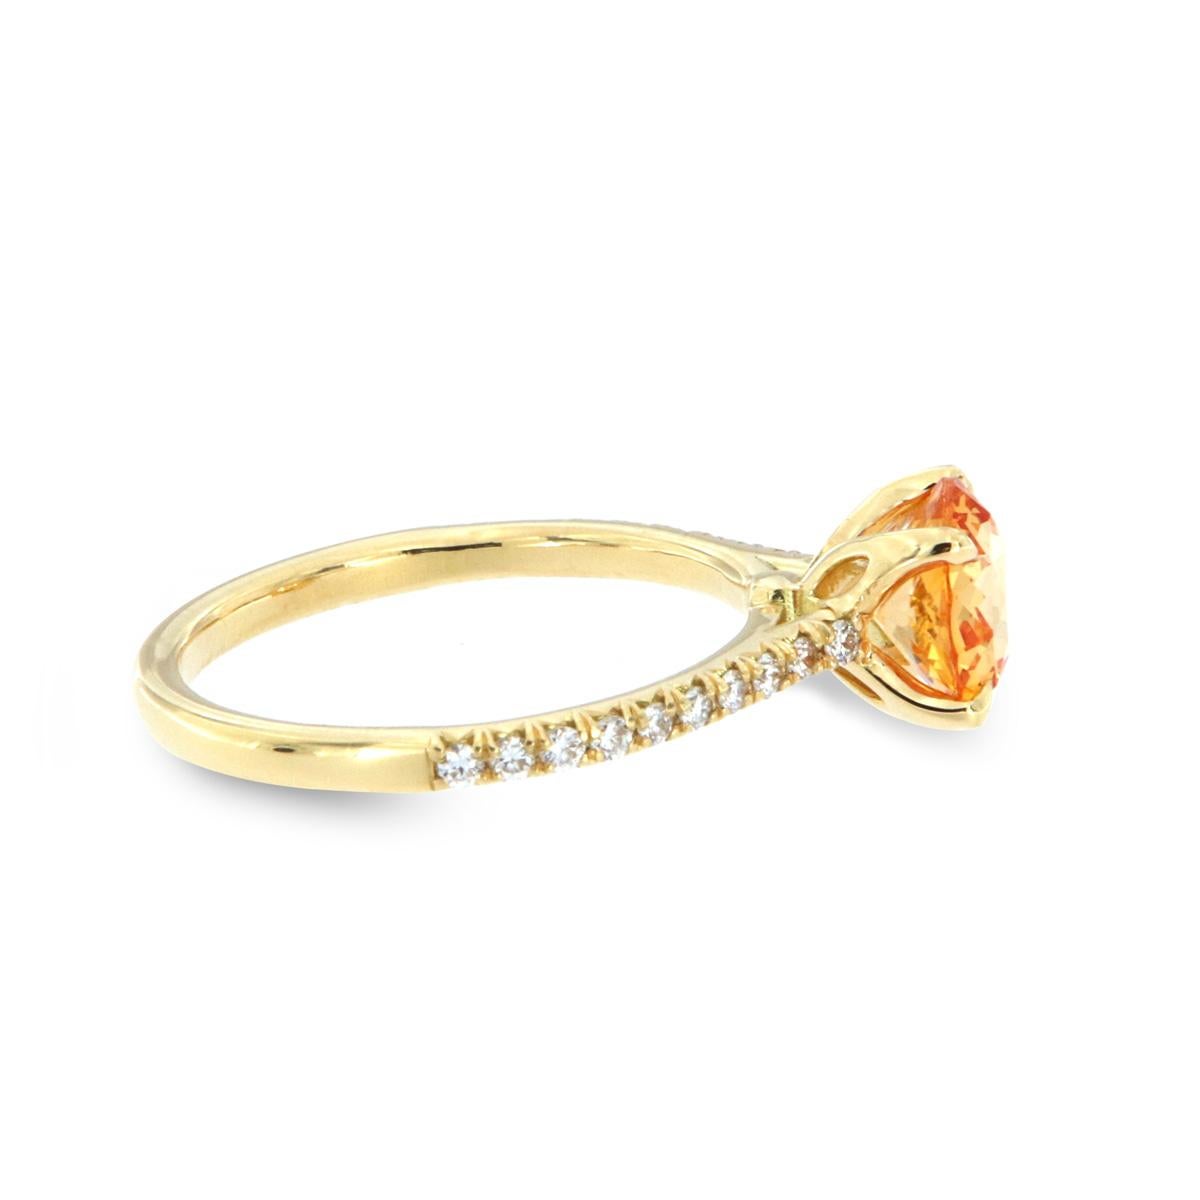 This classic 18K Yellow gold ring features French Pave set diamonds in three-fourths of the band centering a 1.61 carat Orange Sapphire Beryllium Diffused GIA Certificate 2201148708. Twenty brilliant round diamonds in weight of 0.25 Carat. The ring